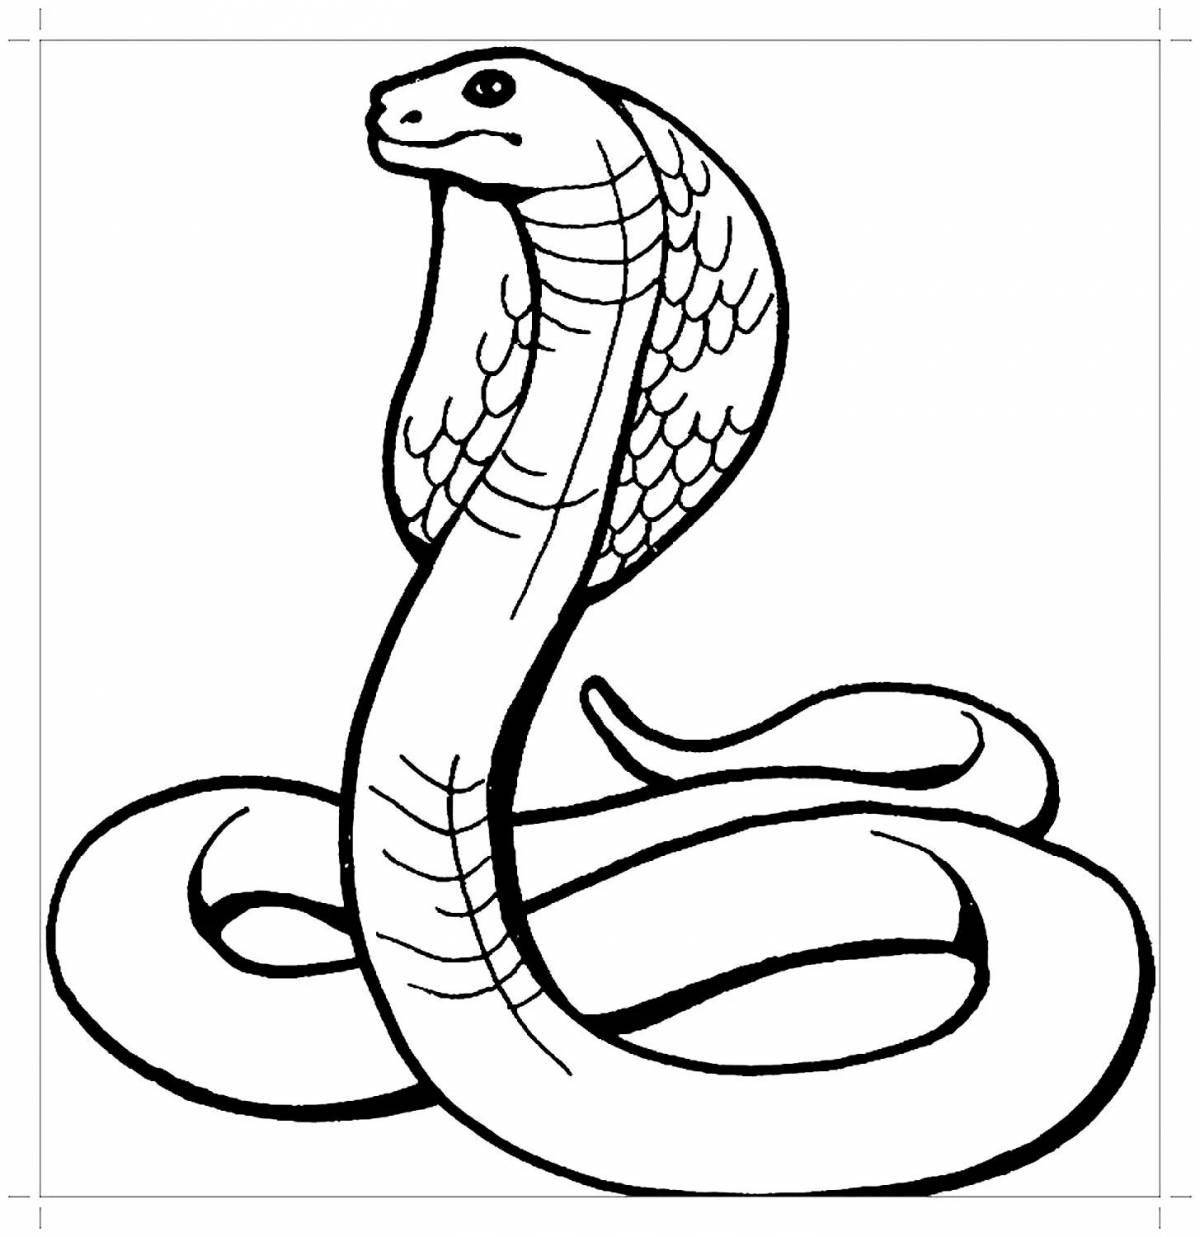 Sweet snake coloring for kids